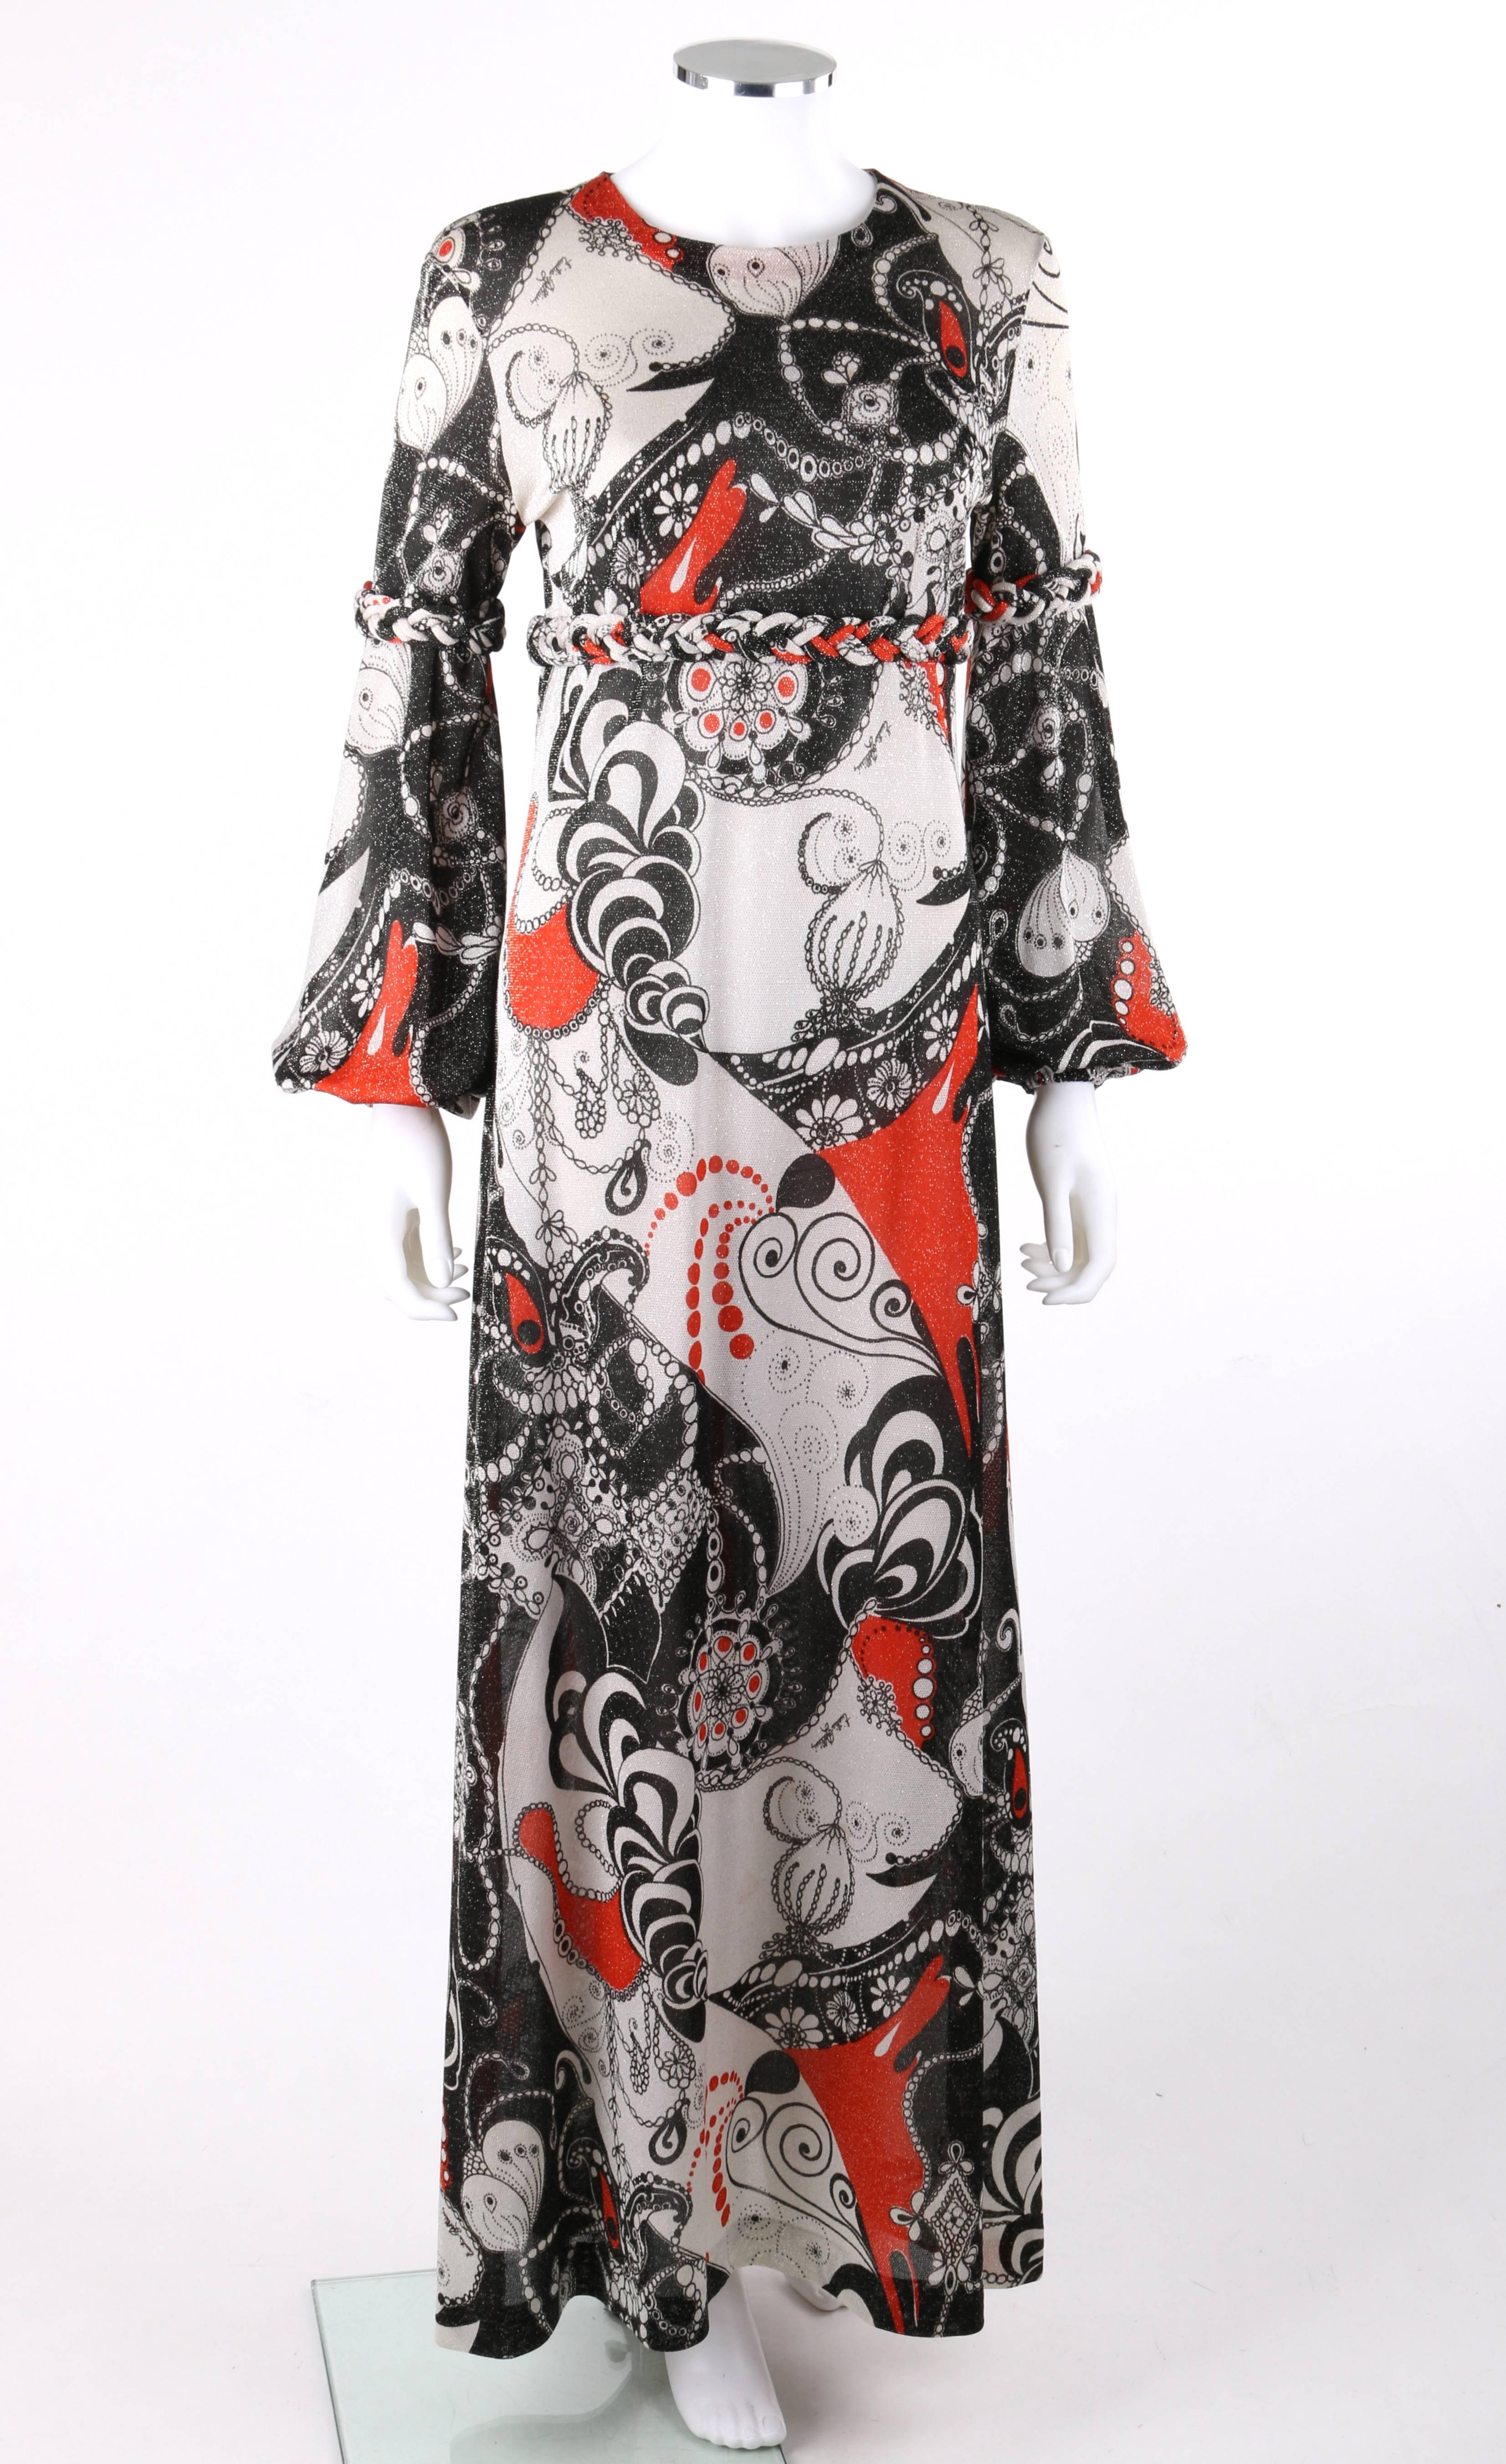 Vintage Emilia Bellini c.1960's op art signature print silk metallic knit maxi dress. Large floral ornate op art signature print metallic silk knit in shades of black, white, and red. Scoop neckline. Long bishop sleeves with elastic cuff. Empire